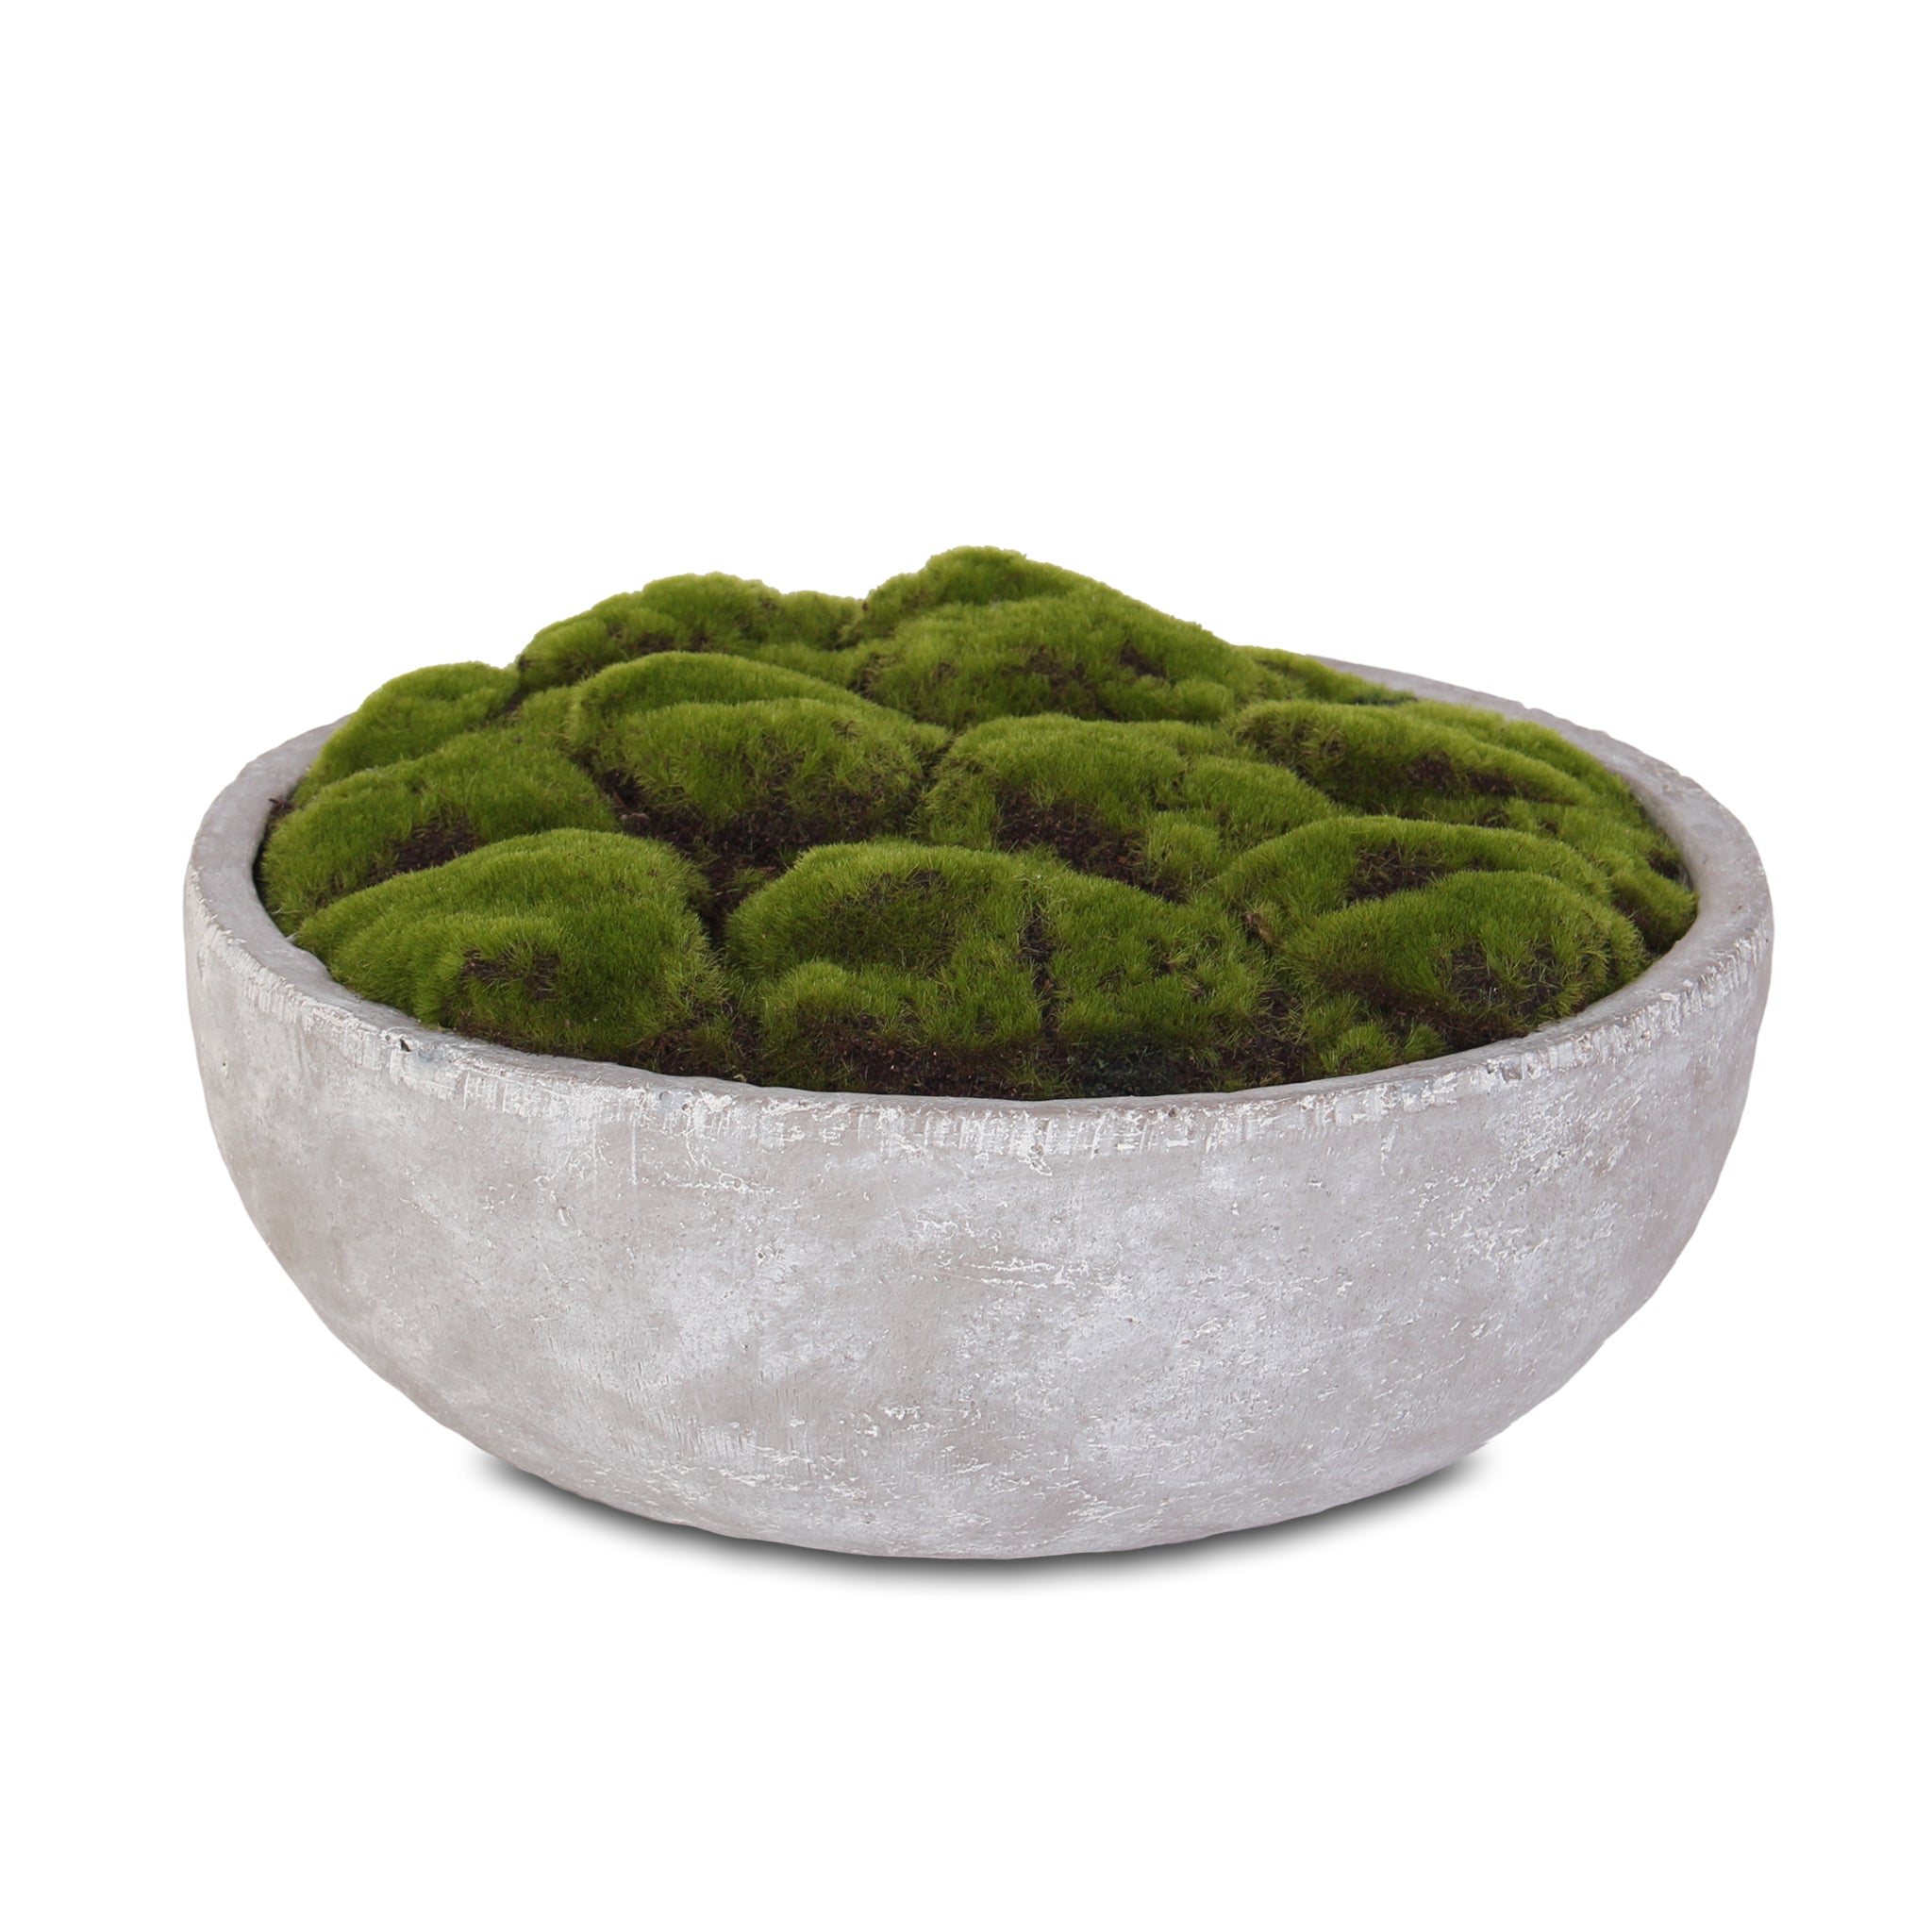 Potted Artificial/Faux Moss + Reviews